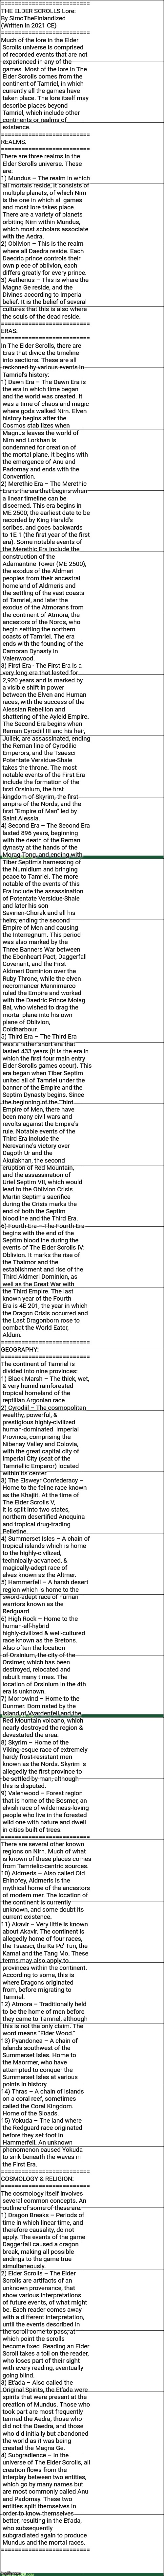 THE ELDER SCROLLS Lore: By SimoTheFinlandized  (Written In 2021 CE) | ==========================
THE ELDER SCROLLS Lore:
By SimoTheFinlandized 
(Written In 2021 CE)
==========================
Much of the lore in the Elder
 Scrolls universe is comprised
 of recorded events that are not
 experienced in any of the
 games. Most of the lore in The
 Elder Scrolls comes from the
 continent of Tamriel, in which
 currently all the games have
 taken place. The lore itself may
 describe places beyond
 Tamriel, which include other
 continents or realms of
 existence.
==========================
REALMS:
==========================
There are three realms in the
 Elder Scrolls universe. These
 are:
1) Mundus – The realm in which
 all mortals reside, It consists of
 multiple planets, of which Nirn
 is the one in which all games
 and most lore takes place.
 There are a variety of planets
 orbiting Nirn within Mundus,
 which most scholars associate
 with the Aedra.
2) Oblivion – This is the realm
 where all Daedra reside. Each
 Daedric prince controls their
 own piece of oblivion, each
 differs greatly for every prince.
3) Aetherius – This is where the
 Magna Ge reside, and the
 Divines according to Imperial
 belief. It is the belief of several
 cultures that this is also where
 the souls of the dead reside.
==========================
ERAS:
==========================
In The Elder Scrolls, there are
 Eras that divide the timeline
 into sections. These are all
 reckoned by various events in
 Tamriel's history:
1) Dawn Era – The Dawn Era is
 the era in which time began
 and the world was created. It
 was a time of chaos and magic
 where gods walked Nirn. Elven
 history begins after the
 Cosmos stabilizes when
 Magnus leaves the world of
 Nirn and Lorkhan is
 condemned for creation of 
 the mortal plane. It begins with
 the emergence of Anu and
 Padomay and ends with the
 Convention.
2) Merethic Era – The Merethic
 Era is the era that begins when
 a linear timeline can be
 discerned. This era begins in
 ME 2500; the earliest date to be
 recorded by King Harald's
 scribes, and goes backwards 
 to 1E 1 (the first year of the first
 era). Some notable events of
 the Merethic Era include the
 construction of the
 Adamantine Tower (ME 2500),
 the exodus of the Aldmeri
 peoples from their ancestral
 homeland of Aldmeris and 
 the settling of the vast coasts
 of Tamriel, and later the
 exodus of the Atmorans from
 the continent of Atmora, the
 ancestors of the Nords, who
 begin settling the northern
 coasts of Tamriel. The era 
 ends with the founding of the
 Camoran Dynasty in
 Valenwood.
3) First Era - The First Era is a
 very long era that lasted for
 2,920 years and is marked by 
 a visible shift in power 
 between the Elven and Human
 races, with the success of the
 Alessian Rebellion and
 shattering of the Ayleid Empire.
 The Second Era begins when
 Reman Cyrodiil III and his heir,
 Juilek, are assassinated, ending
 the Reman line of Cyrodilic
 Emperors, and the Tsaesci
 Potentate Versidue-Shaie 
 takes the throne. The most
 notable events of the First Era
 include the formation of the
 first Orsinium, the first
 kingdom of Skyrim, the first
 empire of the Nords, and the
 first "Empire of Man" led by
 Saint Alessia.
4) Second Era – The Second Era
 lasted 896 years, beginning
 with the death of the Reman
 dynasty at the hands of the
 Morag Tong, and ending with
 Tiber Septim's harnessing of
 the Numidium and bringing
 peace to Tamriel. The more
 notable of the events of this
 Era include the assassination 
 of Potentate Versidue-Shaie
 and later his son
 Savirien-Chorak and all his
 heirs, ending the second
 Empire of Men and causing 
 the Interregnum. This period
 was also marked by the 
 Three Banners War between
 the Ebonheart Pact, Daggerfall
 Covenant, and the First 
 Aldmeri Dominion over the
 Ruby Throne, while the elven
 necromancer Mannimarco
 ruled the Empire and worked
 with the Daedric Prince Molag
 Bal, who wished to drag the
 mortal plane into his own
 plane of Oblivion, 
 Coldharbour.
5) Third Era – The Third Era 
 was a rather short era that
 lasted 433 years (it is the era in
 which the first four main entry
 Elder Scrolls games occur). This
 era began when Tiber Septim
 united all of Tamriel under the
 banner of the Empire and the
 Septim Dynasty begins. Since
 the beginning of the Third
 Empire of Men, there have
 been many civil wars and
 revolts against the Empire's
 rule. Notable events of the
 Third Era include the
 Nerevarine's victory over
 Dagoth Ur and the 
 Akulakhan, the second
 eruption of Red Mountain, 
 and the assassination of 
 Uriel Septim VII, which would
 lead to the Oblivion Crisis.
 Martin Septim's sacrifice 
 during the Crisis marks the 
 end of both the Septim
 bloodline and the Third Era.
6) Fourth Era – The Fourth Era
 begins with the end of the
 Septim bloodline during the
 events of The Elder Scrolls IV:
 Oblivion. It marks the rise of
 the Thalmor and the
 establishment and rise of the
 Third Aldmeri Dominion, as
 well as the Great War with 
 the Third Empire. The last
 known year of the Fourth 
 Era is 4E 201, the year in which
 the Dragon Crisis occurred and
 the Last Dragonborn rose to
 combat the World Eater,
 Alduin.
==========================
GEOGRAPHY:
==========================
The continent of Tamriel is
 divided into nine provinces:
1) Black Marsh – The thick, wet,
 & very humid rainforested
 tropical homeland of the
 reptilian Argonian race.
2) Cyrodiil – The cosmopolitan
 wealthy, powerful, &
 prestigious highly-civilized 
 human-dominated  Imperial
 Province, comprising the
 Nibenay Valley and Colovia,
 with the great capital city of
 Imperial City (seat of the
 Tamriellic Emperor) located 
 within its center.
3) The Elsweyr Confederacy –
 Home to the feline race known
 as the Khajiit. At the time of
 The Elder Scrolls V,
 it is split into two states,
 northern desertified Anequina
 and tropical drug-trading
 Pelletine.
4) Summerset Isles – A chain of
 tropical islands which is home
 to the highly-civilized,
 technically-advanced, &
 magically-adept race of
 elves known as the Altmer.
5) Hammerfell – A harsh desert
 region which is home to the
 sword-adept race of human
 warriors known as the 
 Redguard.
6) High Rock – Home to the
 human-elf-hybrid
 highly-civilized & well-cultured
 race known as the Bretons.
 Also often the location
 of Orsinium, the city of the
 Orsimer, which has been
 destroyed, relocated and
 rebuilt many times. The
 location of Orsinium in the 4th
 era is unknown.
7) Morrowind – Home to the
 Dunmer. Dominated by the
 island of Vvardenfell and the
 Red Mountain volcano, which
 nearly destroyed the region &
 devastated the area.
8) Skyrim – Home of the
 Viking-esque race of extremely
 hardy frost-resistant men
 known as the Nords. Skyrim is
 allegedly the first province to
 be settled by man, although
 this is disputed.
9) Valenwood – Forest region
 that is home of the Bosmer, an
 elvish race of wilderness-loving
 people who live in the forested
 wild one with nature and dwell
 in cities built of trees.
==========================
There are several other known
 regions on Nirn. Much of what
 is known of these places comes
 from Tamrielic-centric sources.
10) Aldmeris – Also called Old
 Ehlnofey, Aldmeris is the
 mythical home of the ancestors
 of modern mer. The location of
 the continent is currently
 unknown, and some doubt its
 current existence.
11) Akavir – Very little is known
 about Akavir. The continent is
 allegedly home of four races,
 the Tsaesci, the Ka Po' Tun, the
 Kamal and the Tang Mo. These
 terms may also apply to
 provinces within the continent.
 According to some, this is
 where Dragons originated
 from, before migrating to
 Tamriel.
12) Atmora – Traditionally held
 to be the home of men before
 they came to Tamriel, although
 this is not the only claim. The
 word means "Elder Wood."
13) Pyandonea – A chain of
 islands southwest of the
 Summerset Isles. Home to 
 the Maormer, who have
 attempted to conquer the
 Summerset Isles at various
 points in history.
14) Thras – A chain of islands 
 on a coral reef, sometimes
 called the Coral Kingdom.
 Home of the Sloads.
15) Yokuda – The land where
 the Redguard race originated
 before they set foot in
 Hammerfell. An unknown
 phenomenon caused Yokuda
 to sink beneath the waves in
 the First Era.
==========================
COSMOLOGY & RELIGION:
==========================
The cosmology itself involves
 several common concepts. An
 outline of some of these are:
1) Dragon Breaks – Periods of
 time in which linear time, and
 therefore causality, do not
 apply. The events of the game
 Daggerfall caused a dragon
 break, making all possible
 endings to the game true
 simultaneously.
2) Elder Scrolls – The Elder
 Scrolls are artifacts of an
 unknown provenance, that
 show various interpretations 
 of future events, of what might
 be. Each reader comes away
 with a different interpretation,
 until the events described in
 the scroll come to pass, at
 which point the scrolls 
 become fixed. Reading an Elder
 Scroll takes a toll on the reader,
 who loses part of their sight
 with every reading, eventually
 going blind.
3) Et'ada – Also called the
 Original Spirits, the Et'ada were
 spirits that were present at the
 creation of Mundus. Those who
 took part are most frequently
 termed the Aedra, those who
 did not the Daedra, and those
 who did initially but abandoned
 the world as it was being
 created the Magna Ge.
4) Subgradience – In the
 universe of The Elder Scrolls, all
 creation flows from the
 interplay between two entities,
 which go by many names but
 are most commonly called Anu
 and Padomay. These two
 entities split themselves in
 order to know themselves
 better, resulting in the Et'ada,
 who subsequently
 subgradiated again to produce
 Mundus and the mortal races.
========================== | image tagged in the elder scrolls,history,mythology | made w/ Imgflip meme maker